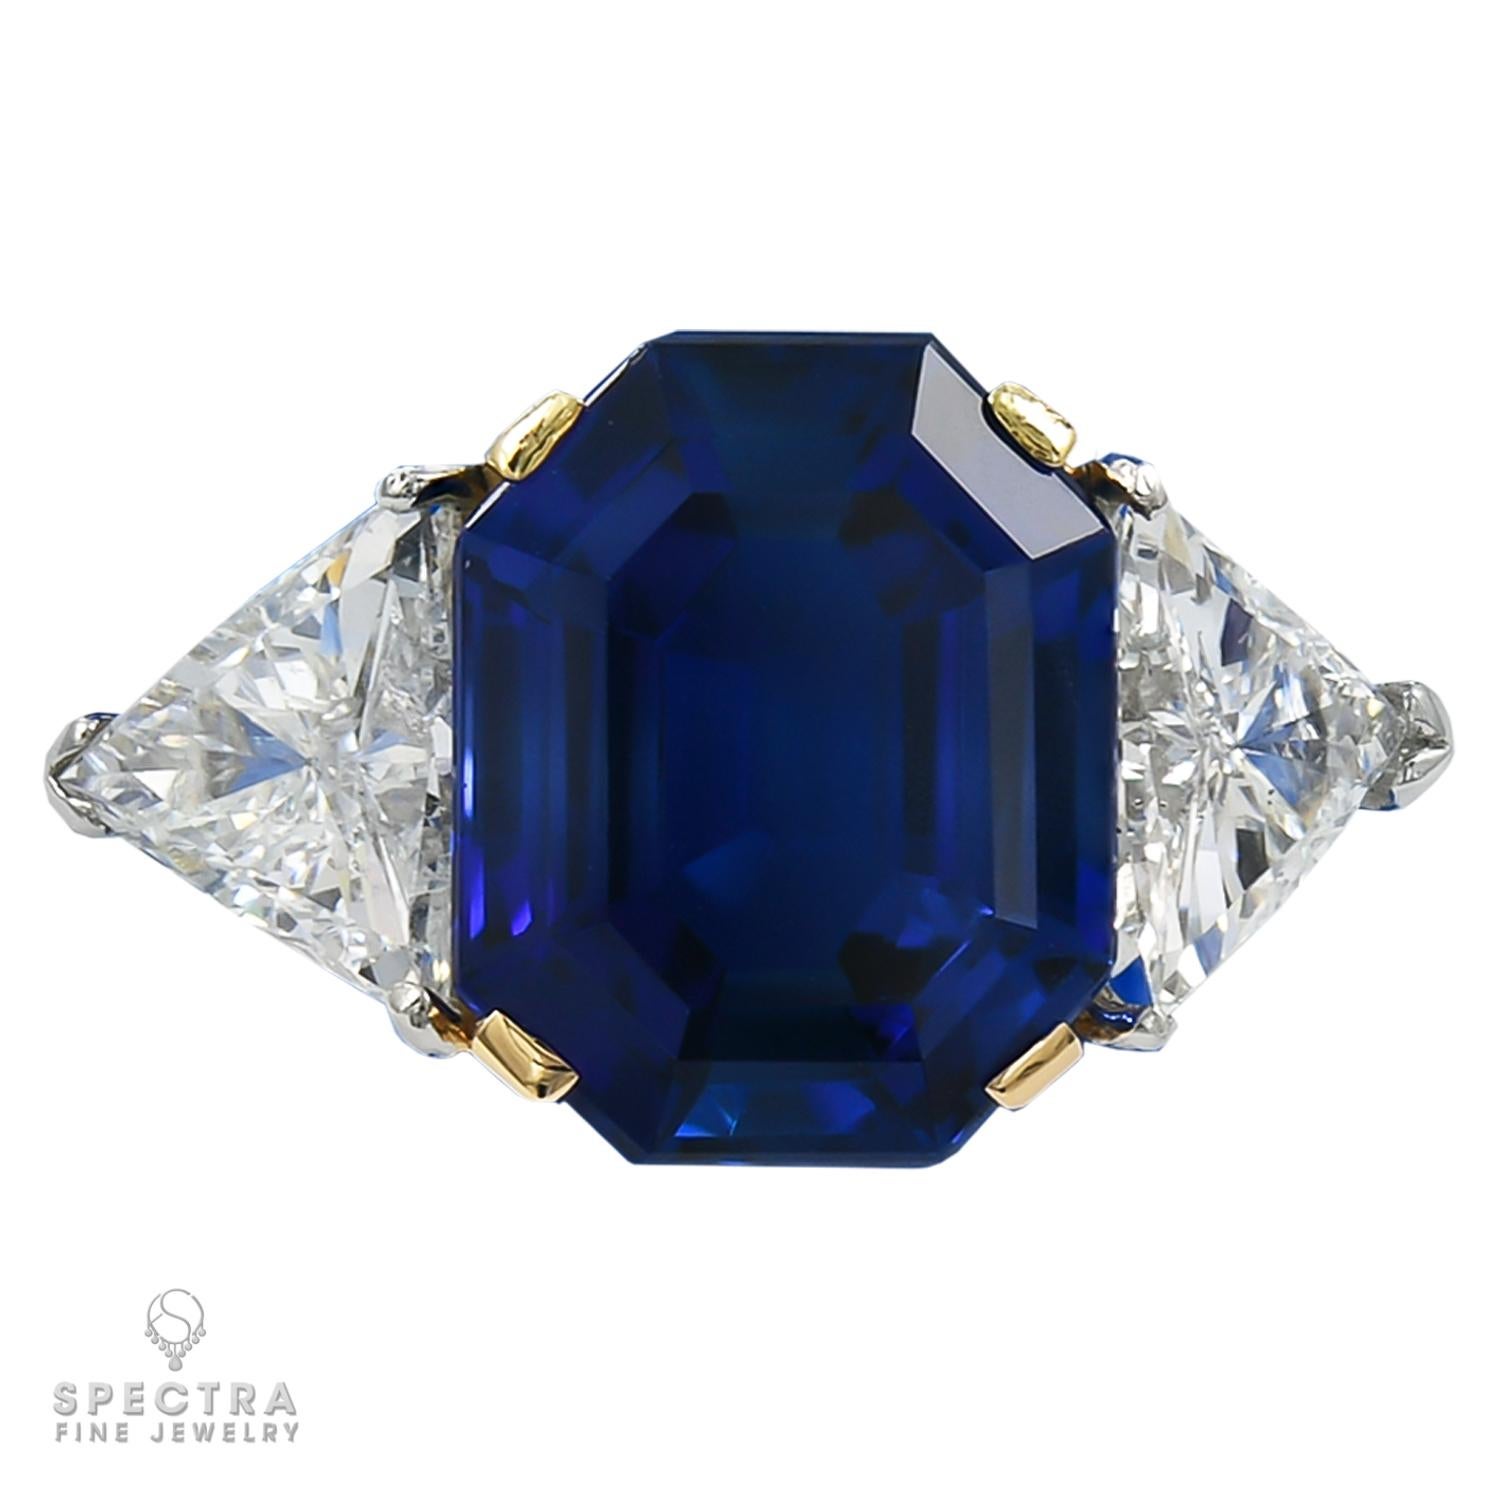 Spectra Fine Jewelry, AGL Certified 7.80 Carat Burma Sapphire Diamond Ring In New Condition For Sale In New York, NY